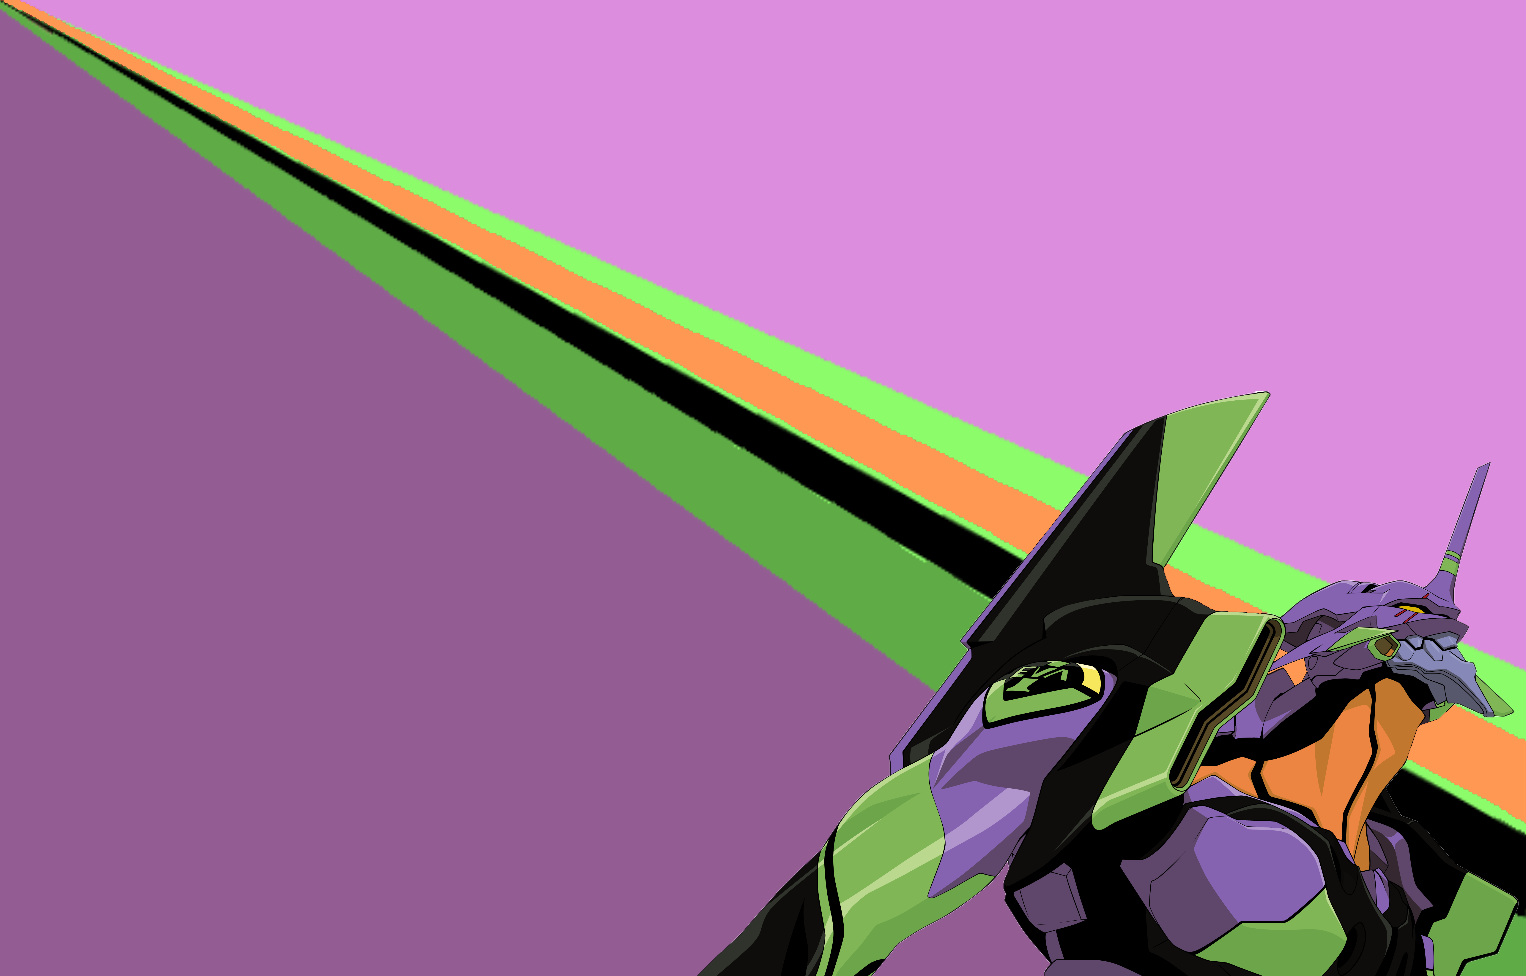 I decided to start making some pc wallpaper, and the first one I decided to make is (of course) an Evangelion wallpaper. I hope some people on this subreddit will like it